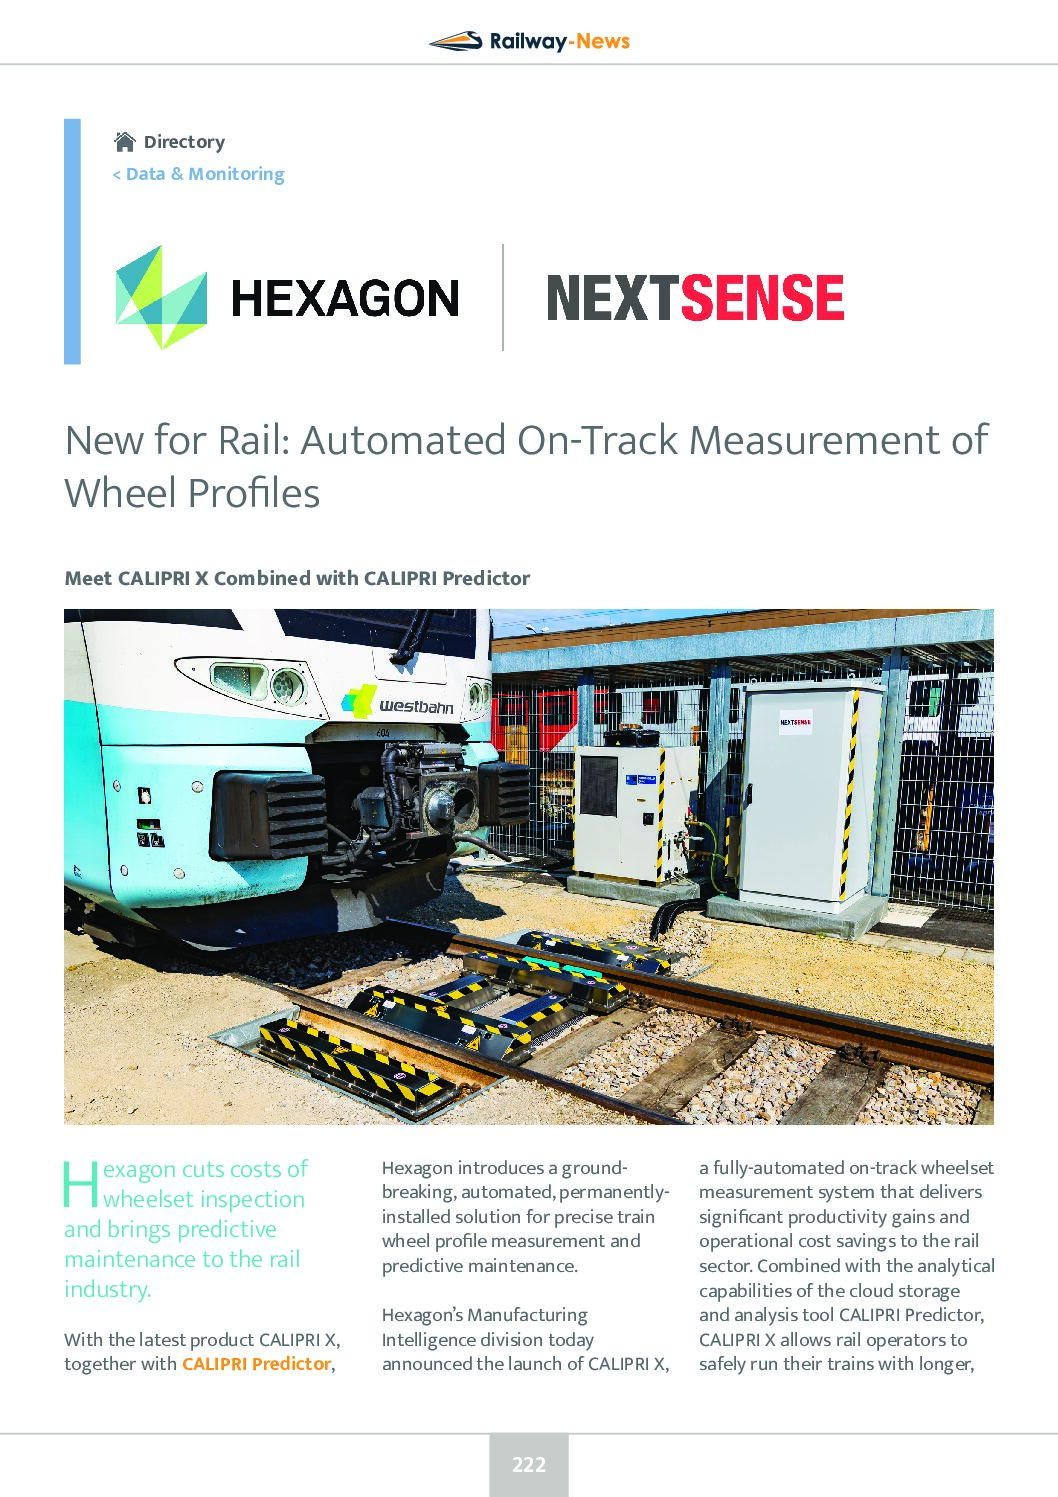 New for Rail: Automated On-Track Measurement of Wheel Profiles